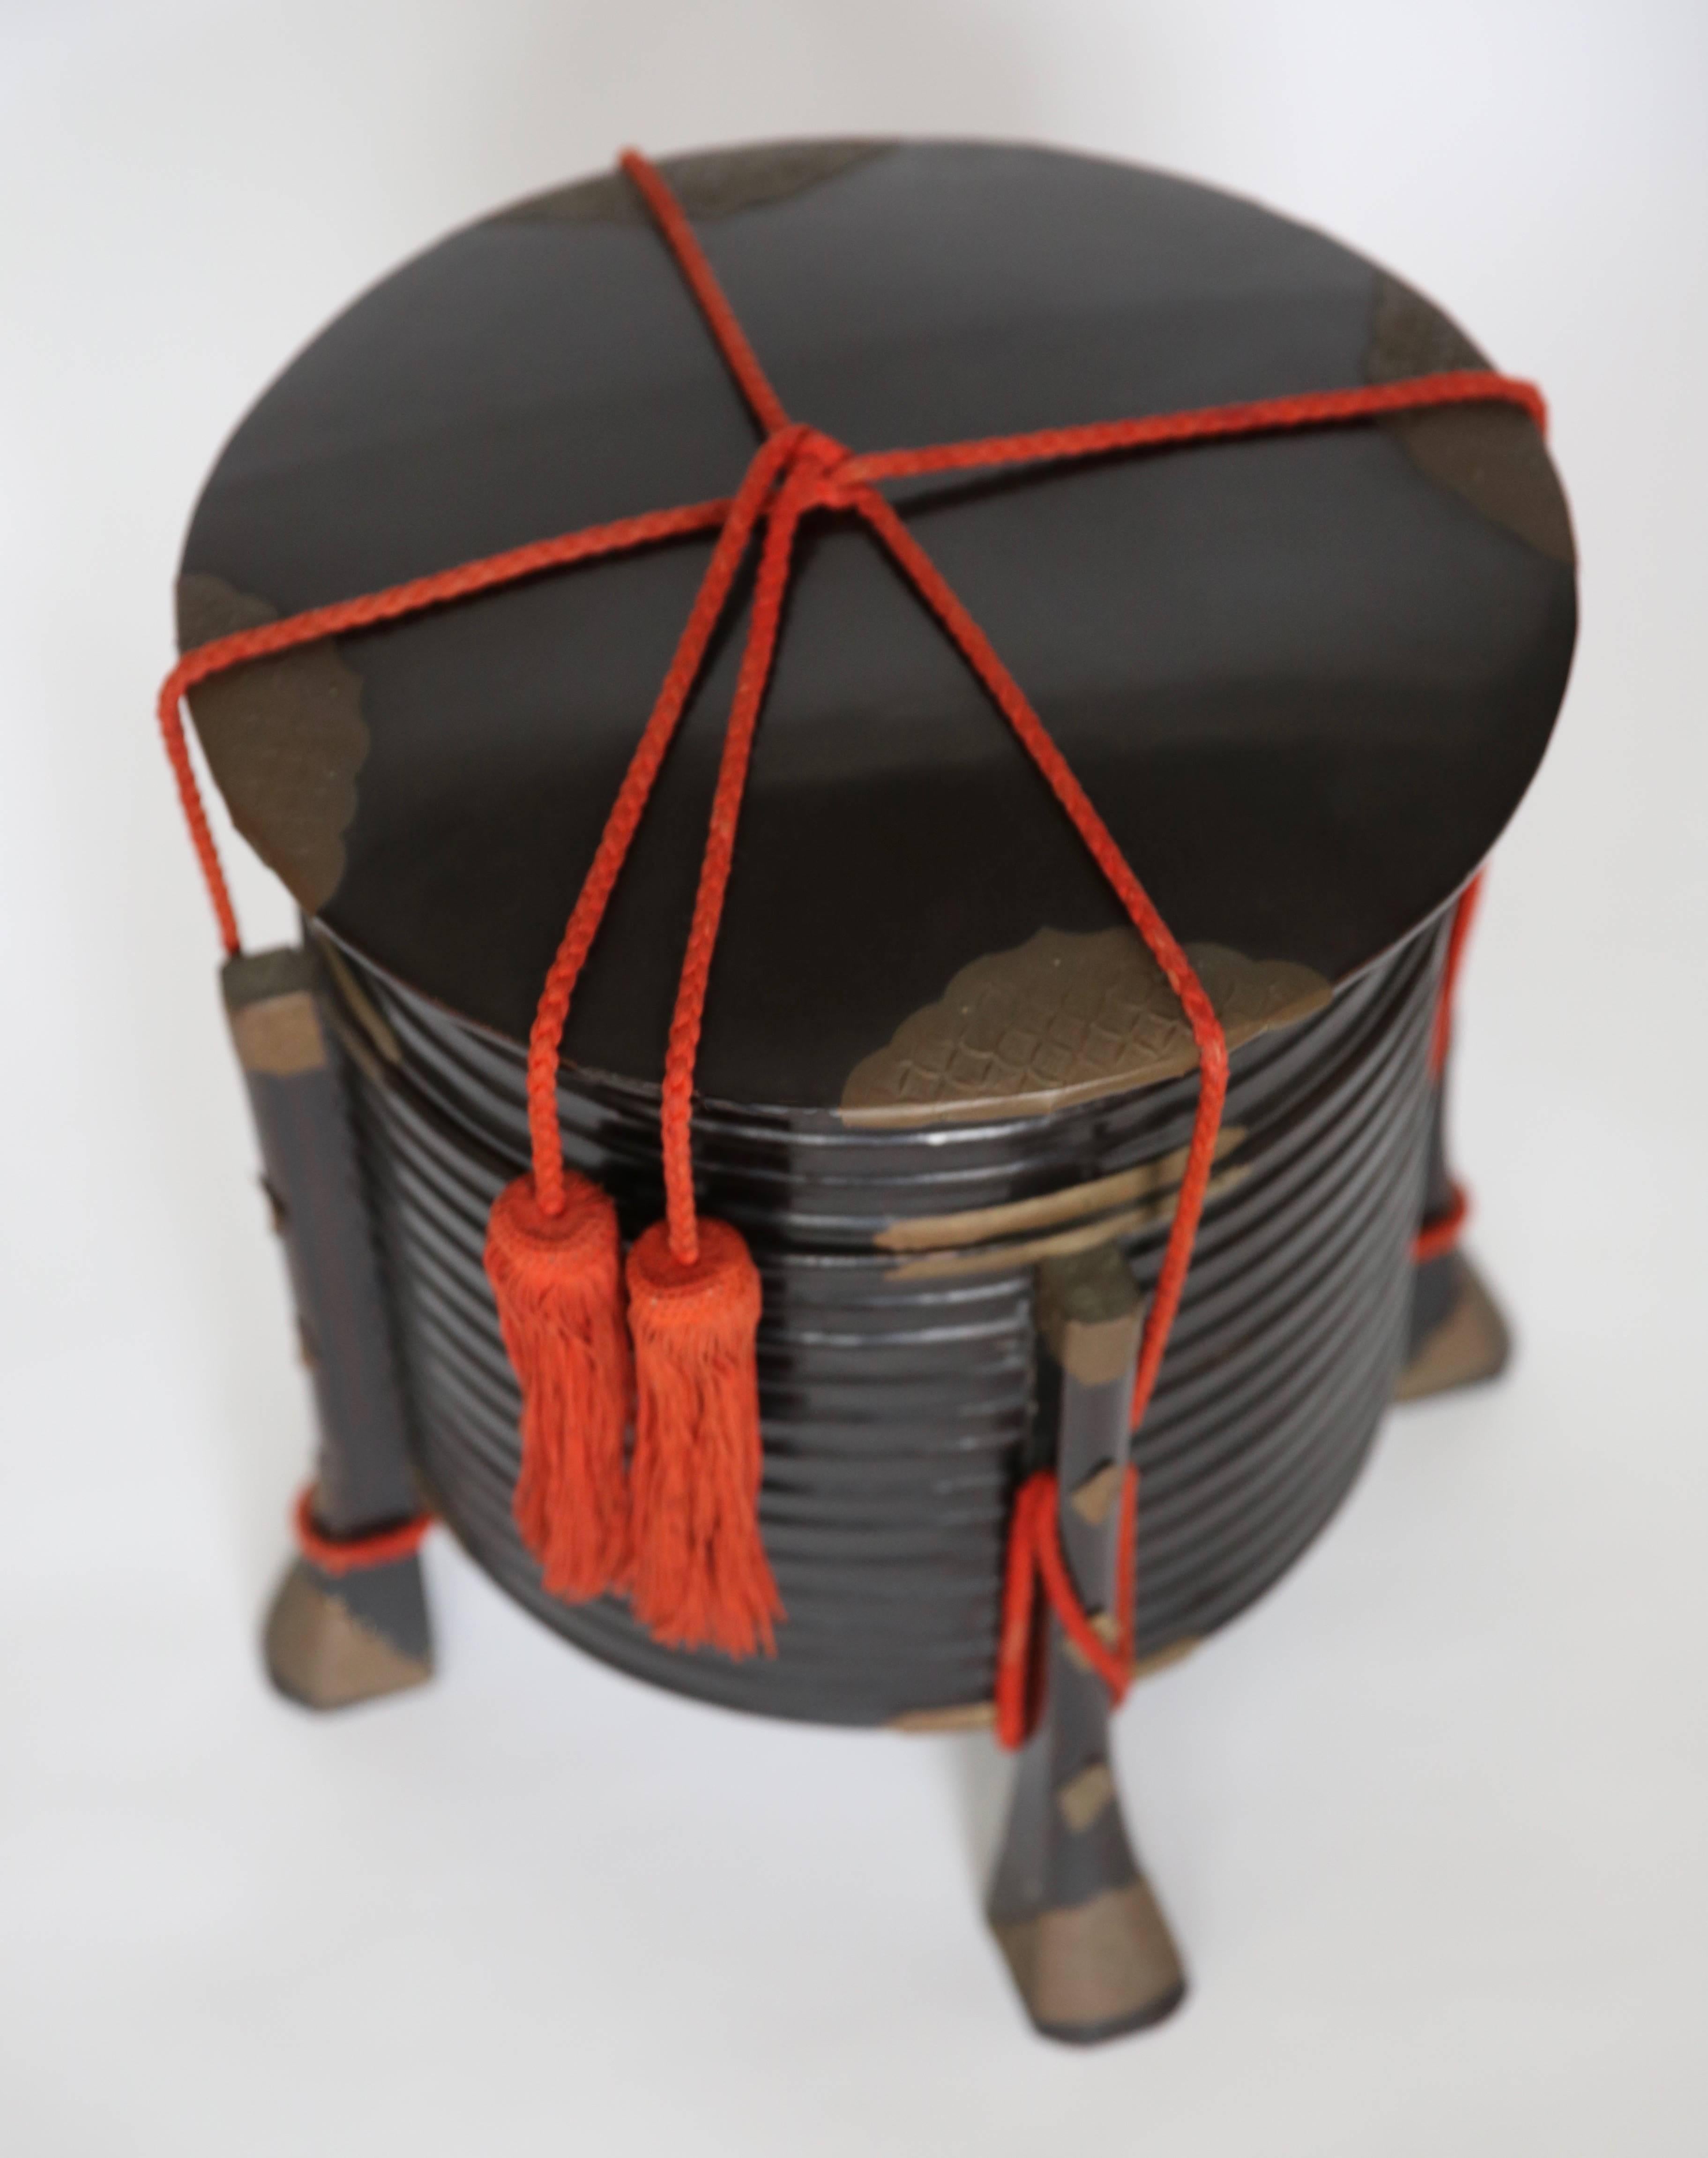 A Meiji period Japanese black lacquer hat box with red rope and chiseled copper decor details.
Japanese late Meiji period Hokkai box or hat box.
The body shaped as a series of stacked rings. Four legs run up the sides of the body, and are